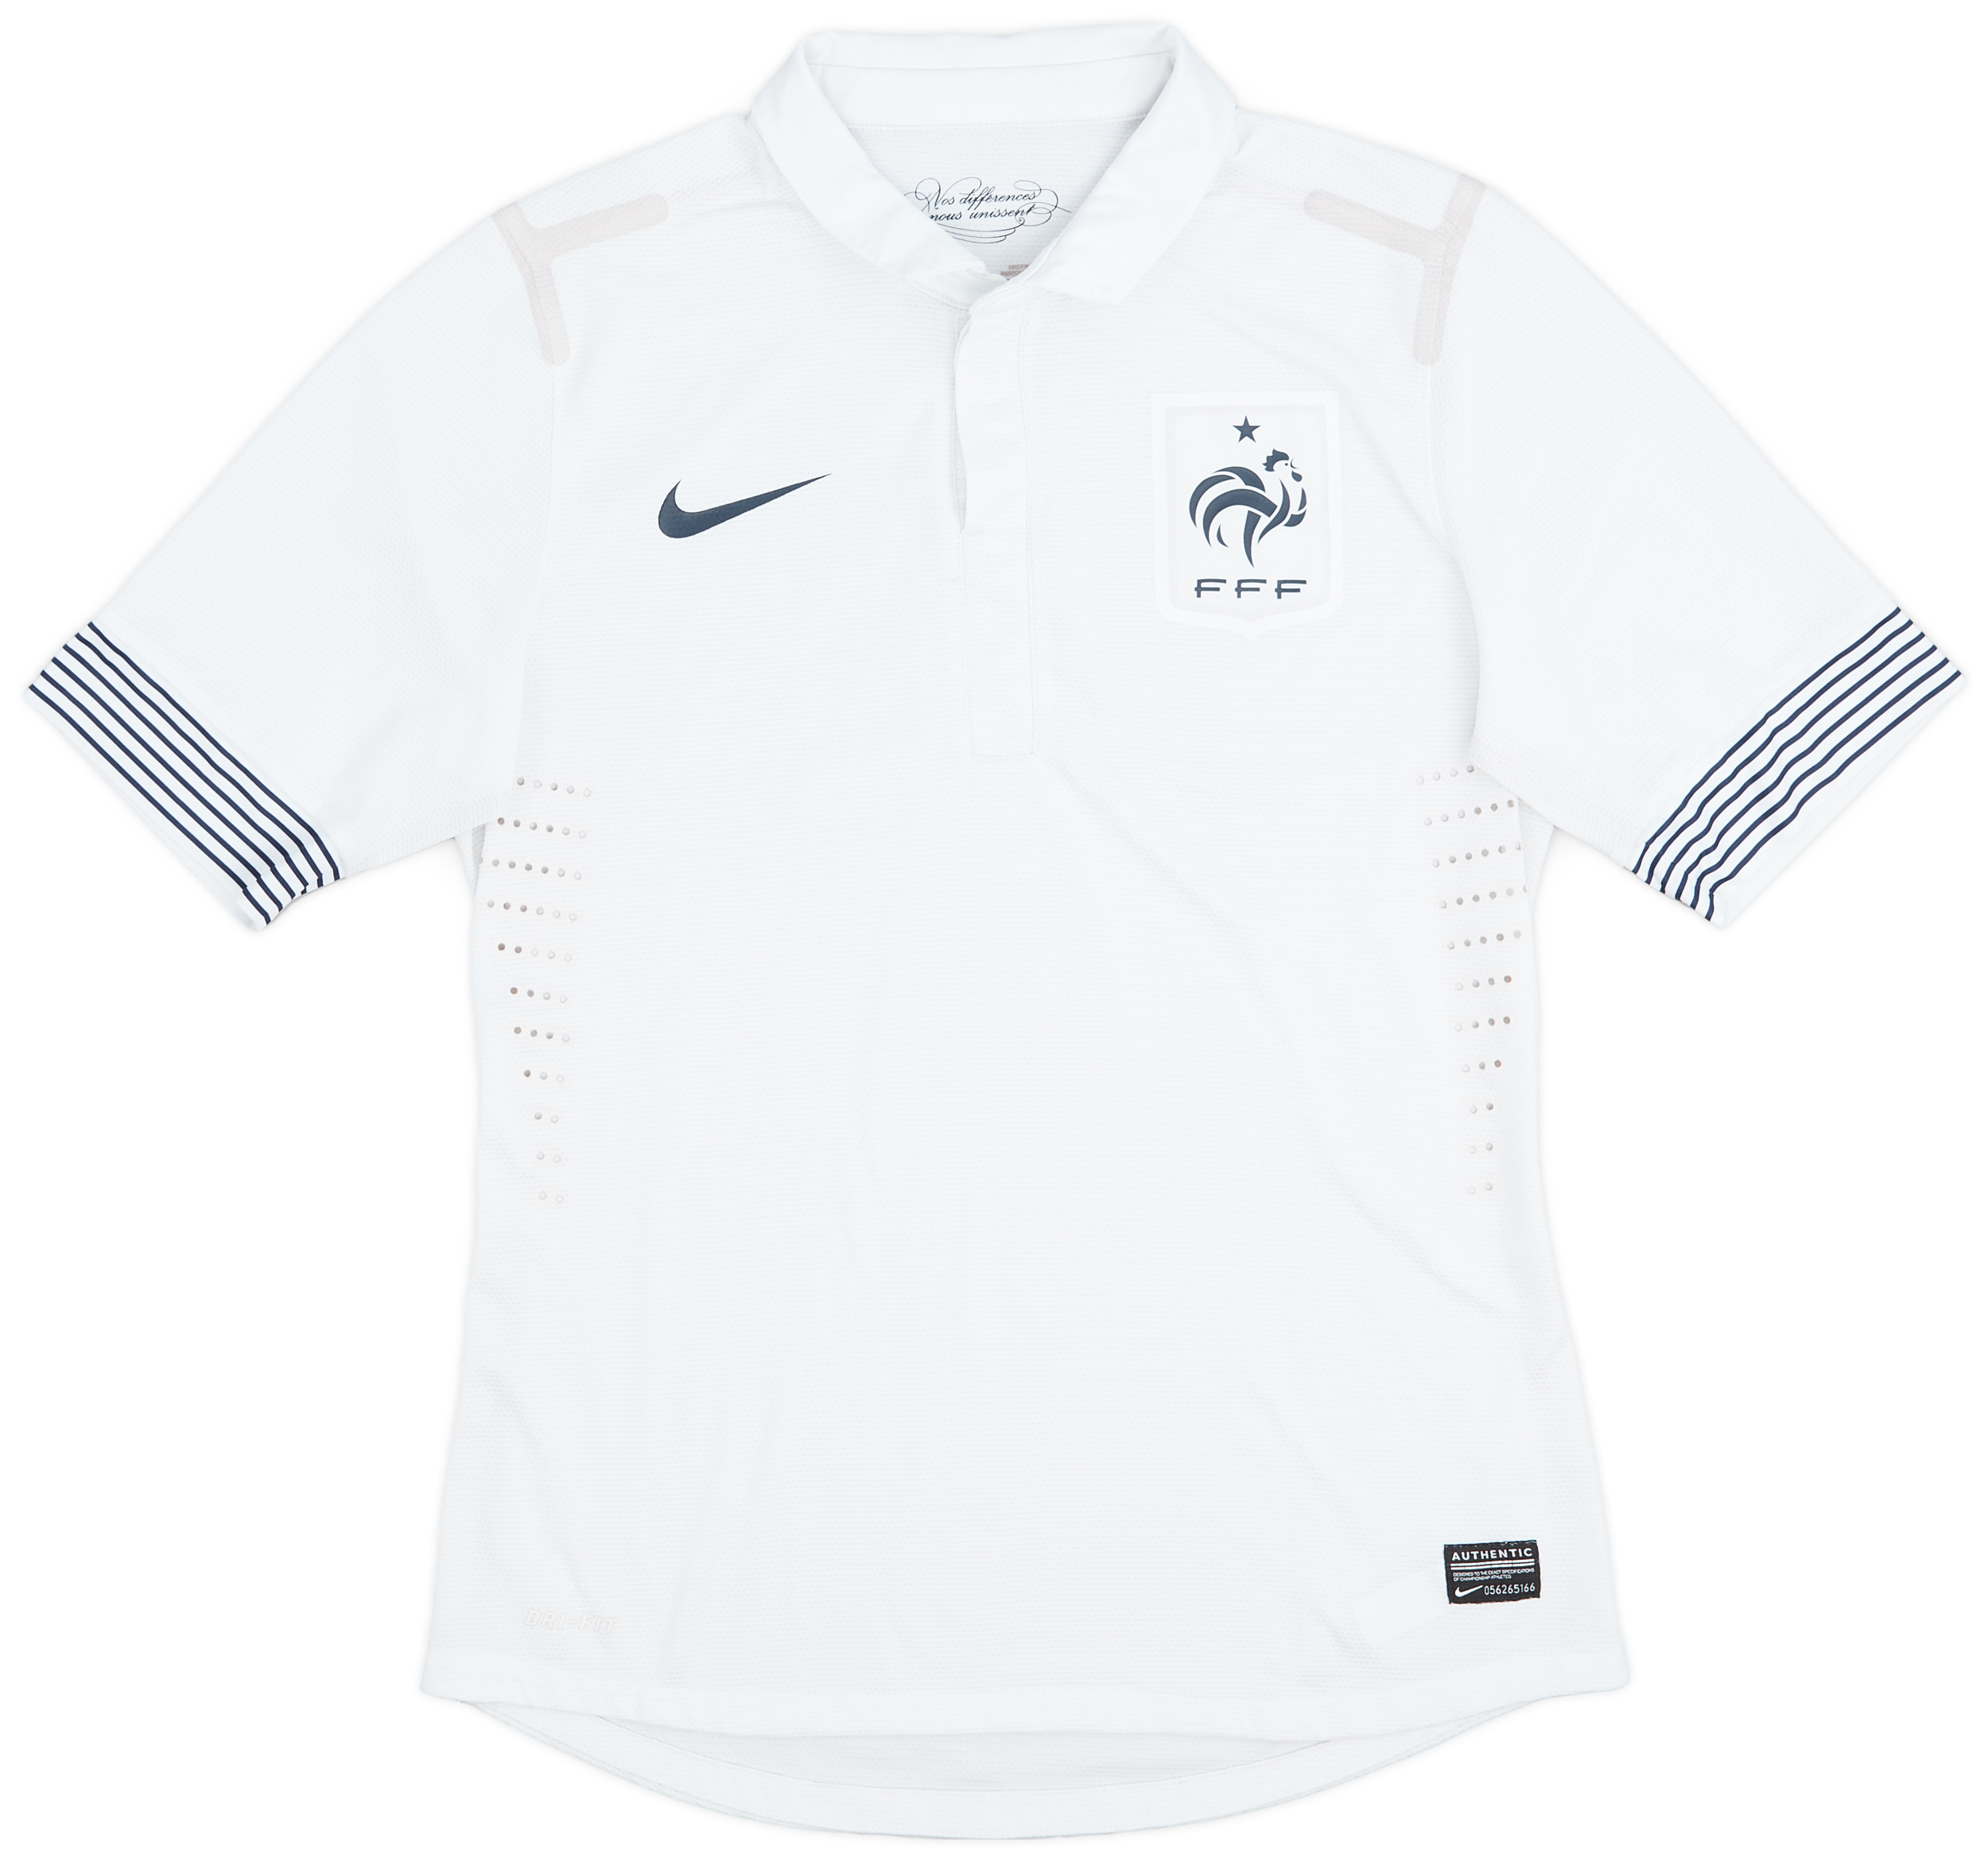 2012-13 France Authentic Away Shirt - 9/10 - ()